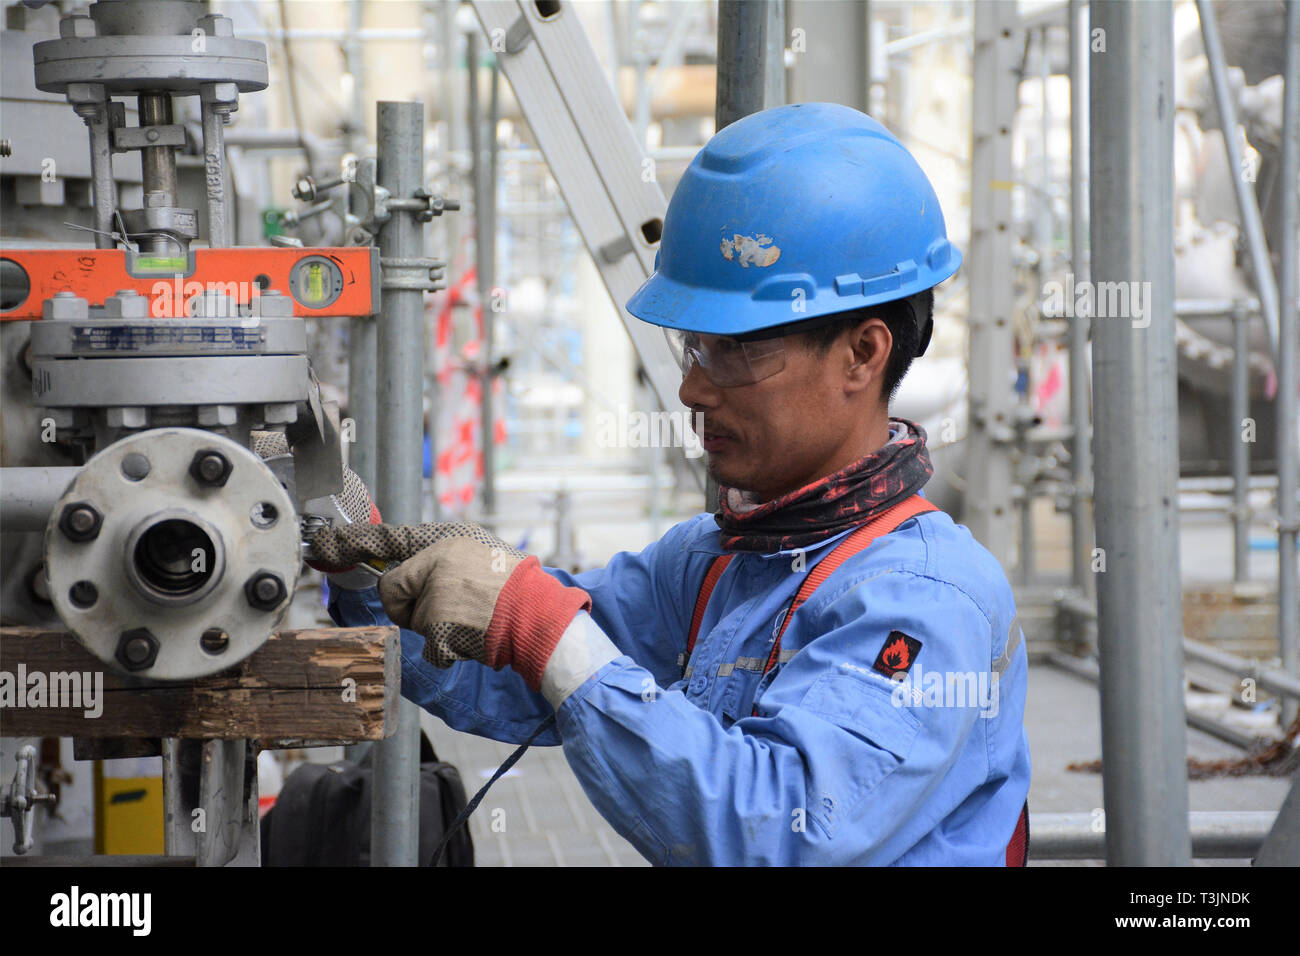 (190410) -- AL AHMADI GOVERNORATE, April 10, 2019 (Xinhua) -- An employee of China Petrochemical Corporation (Sinopec) Fifth Construction Company works at the construction site of the Kuwait New Refinery Project in Al Ahmadi Governorate, Kuwait, April 7, 2019. TO GO WITH Feature: Chinese oil refiner builds Chinese brand in Kuwait (Xinhua/Li Jinxue) Stock Photo